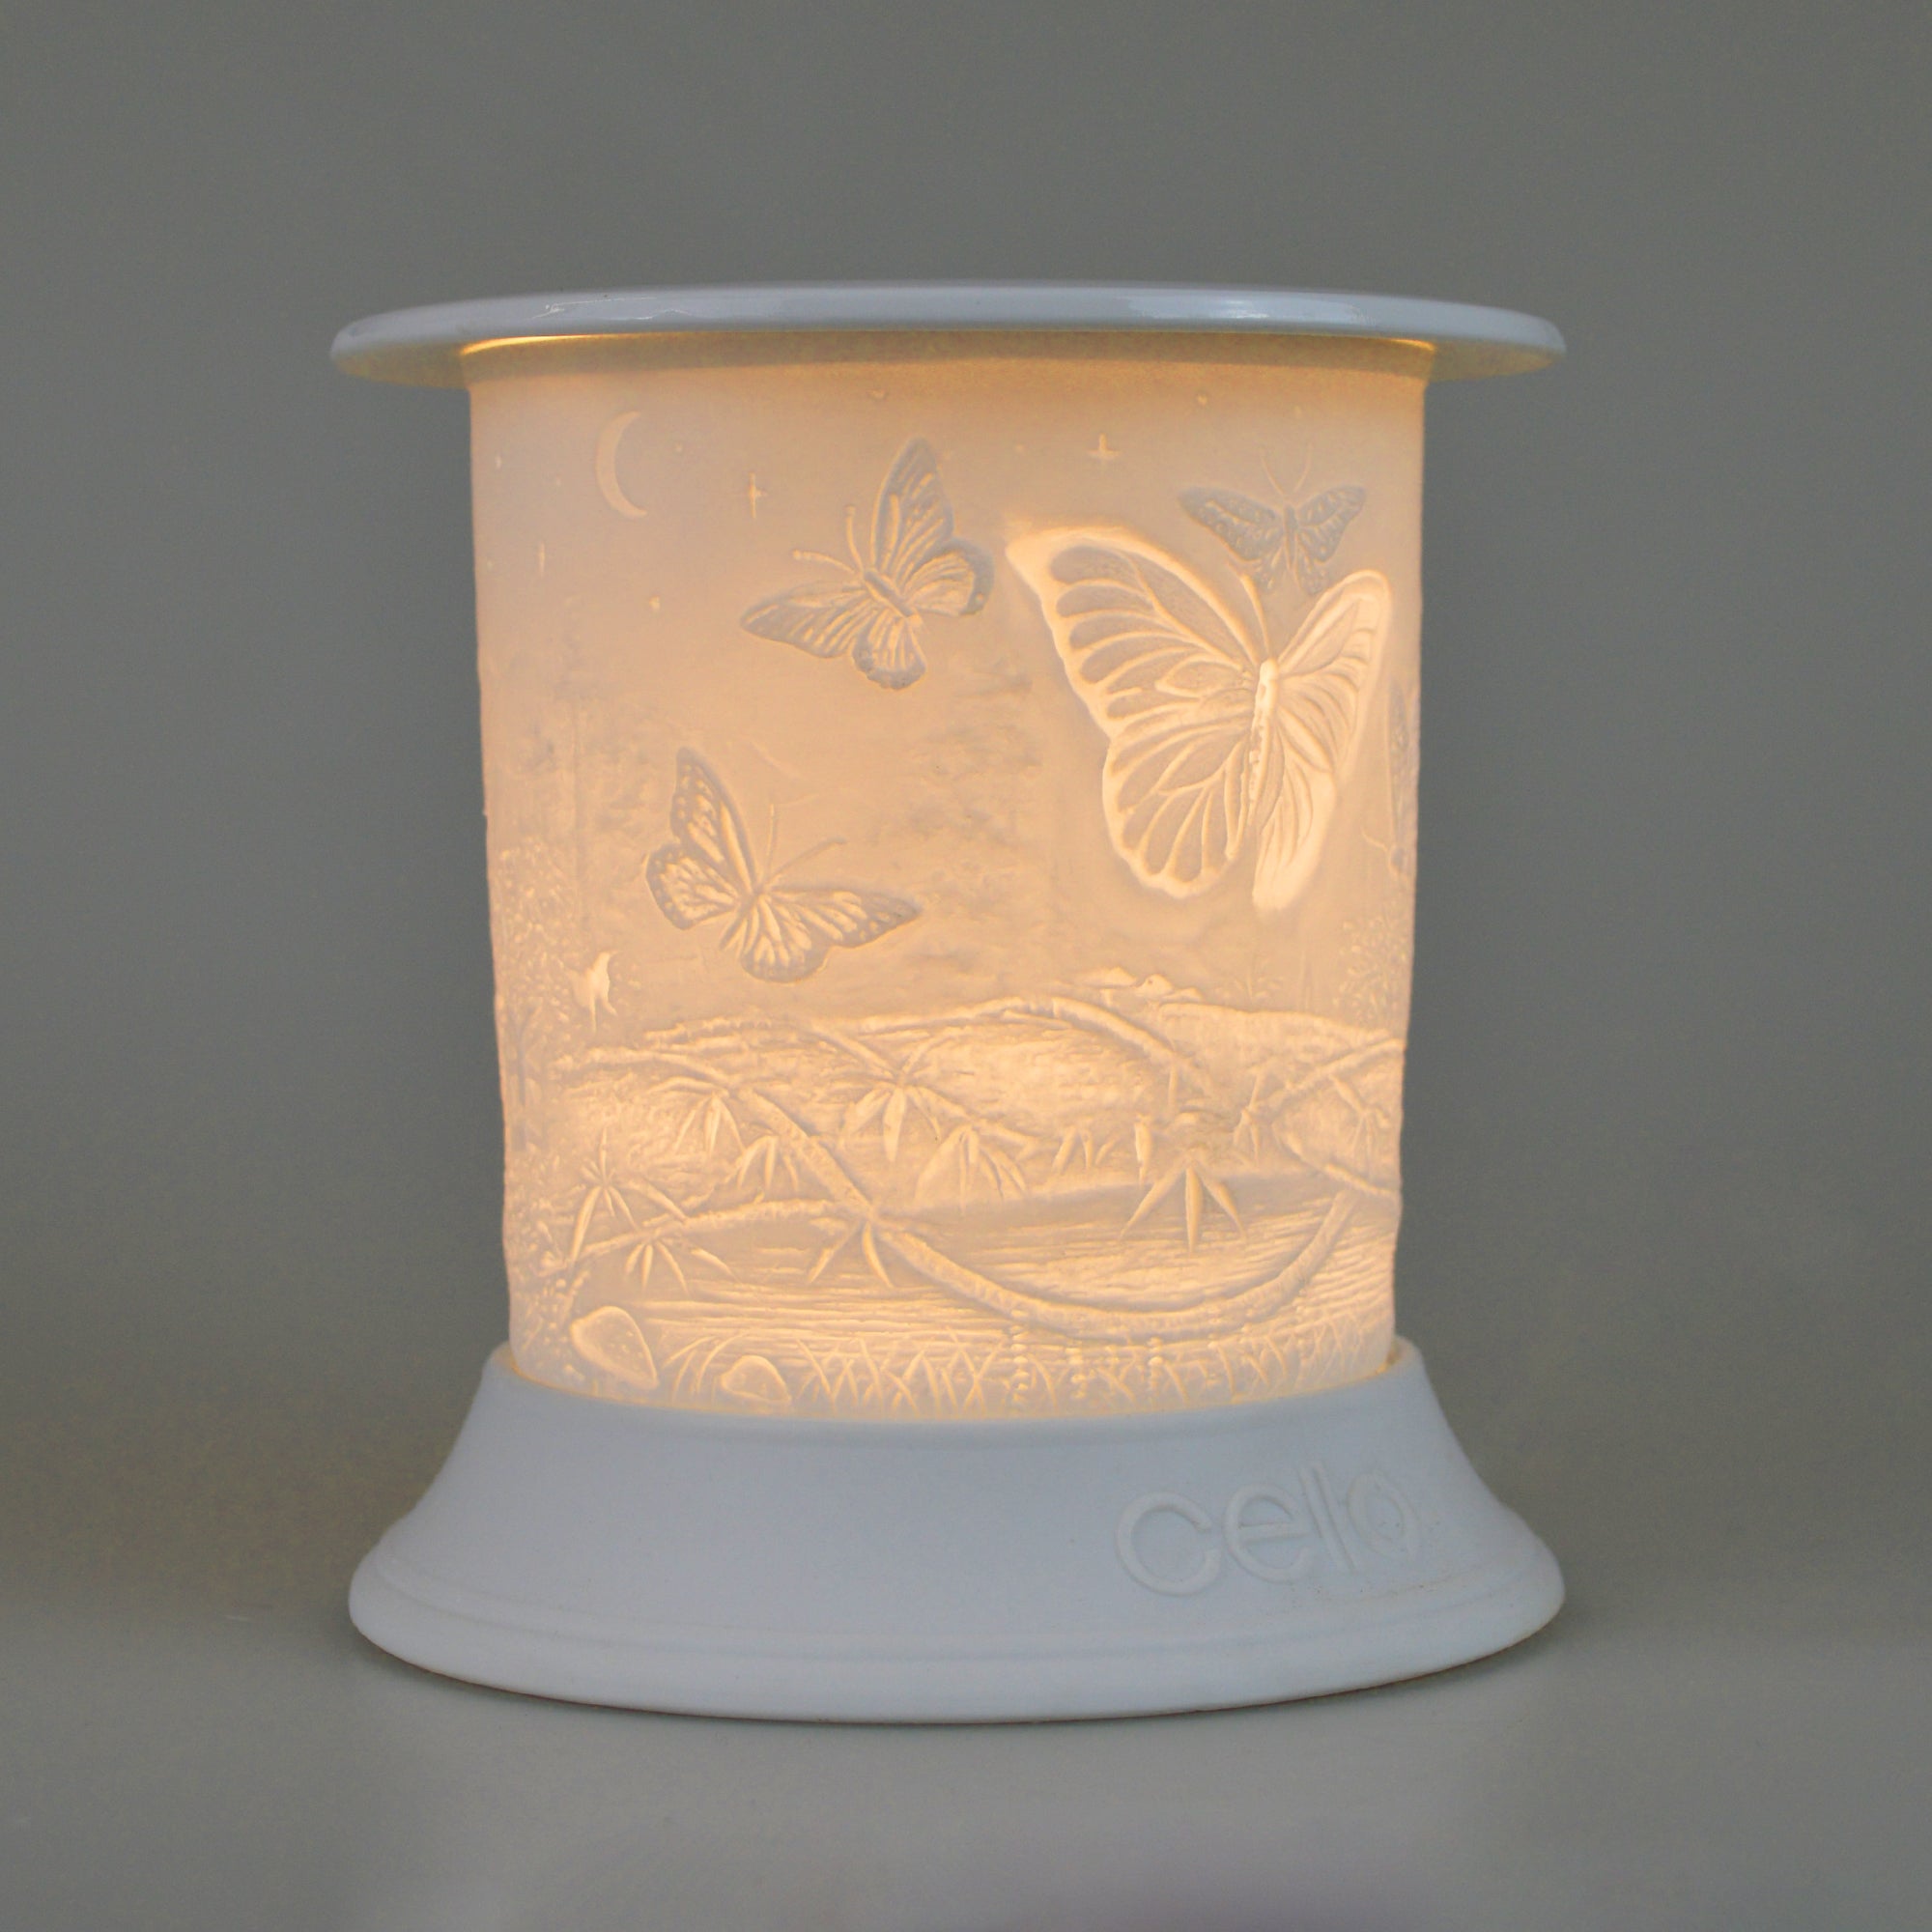 Cello - Butterfly Straight Porcelain Electric Wax Burner